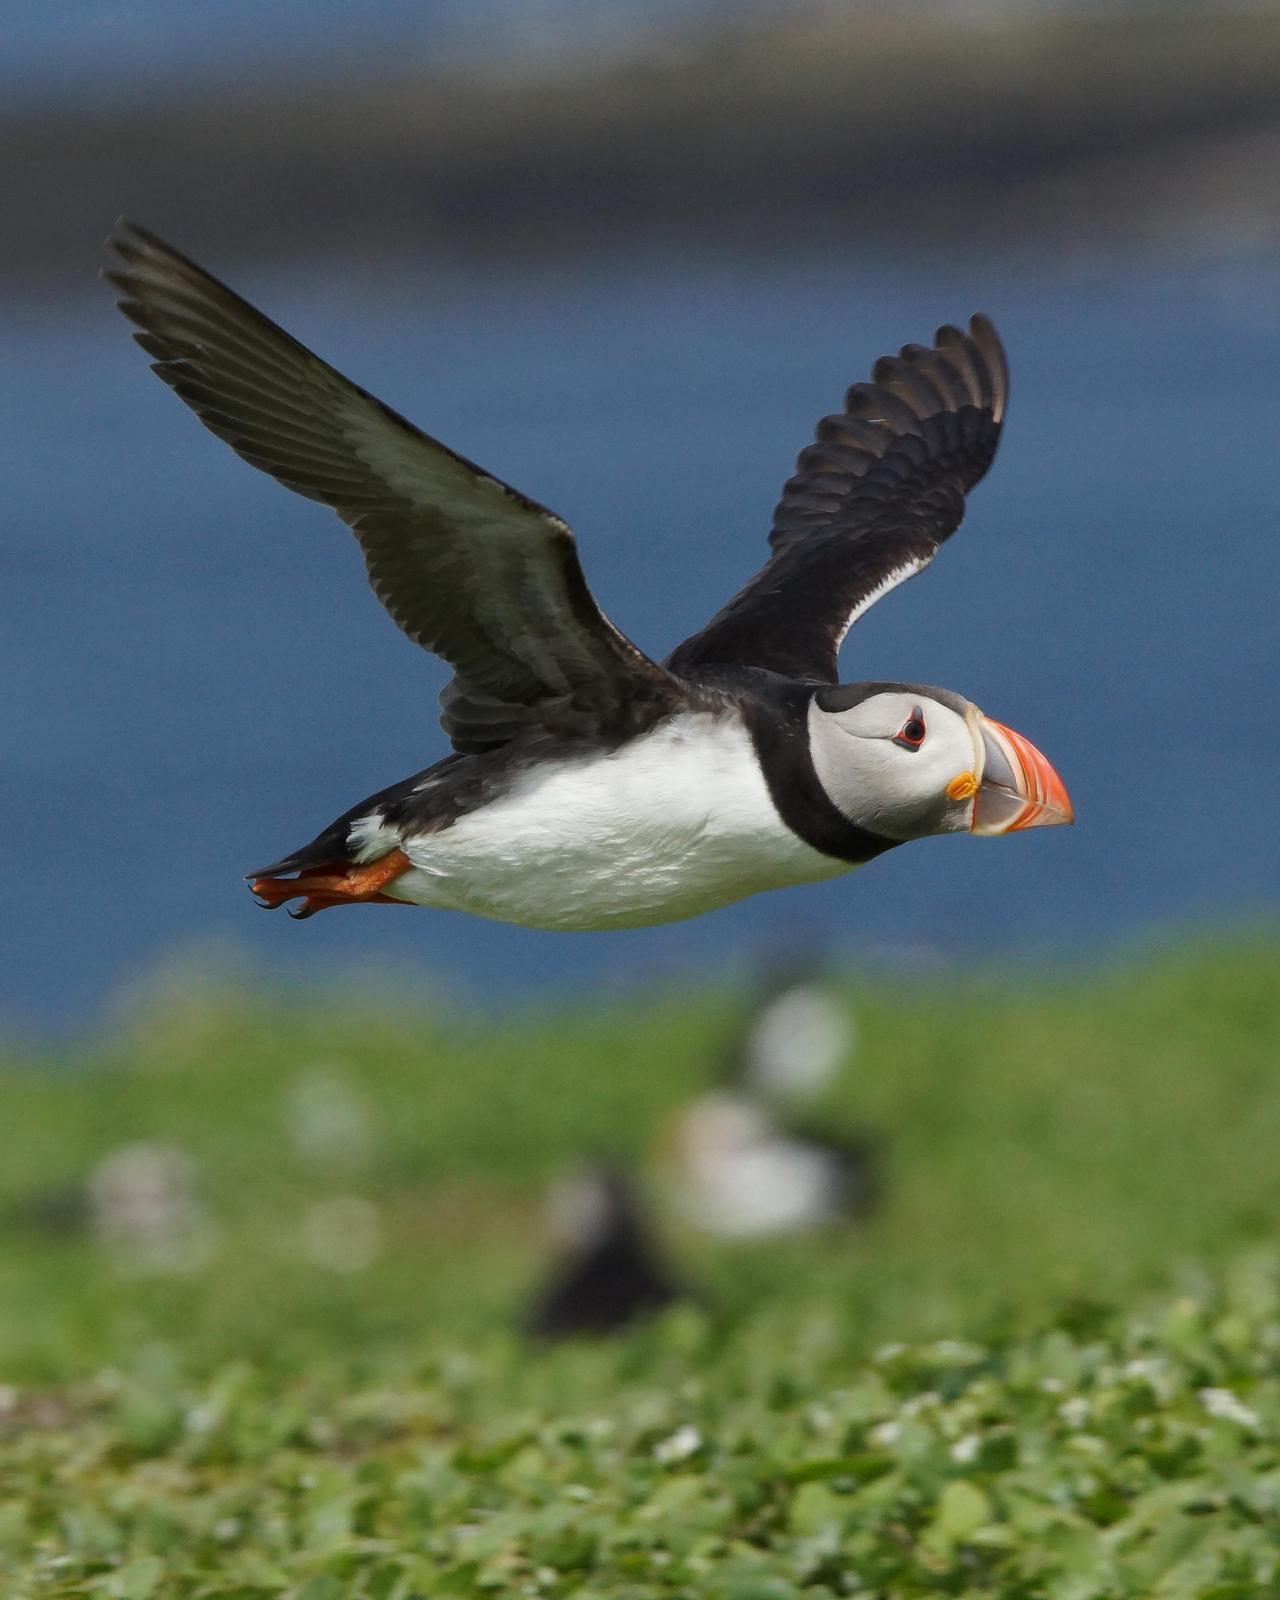 Atlantic Puffin Photo by Steve Percival